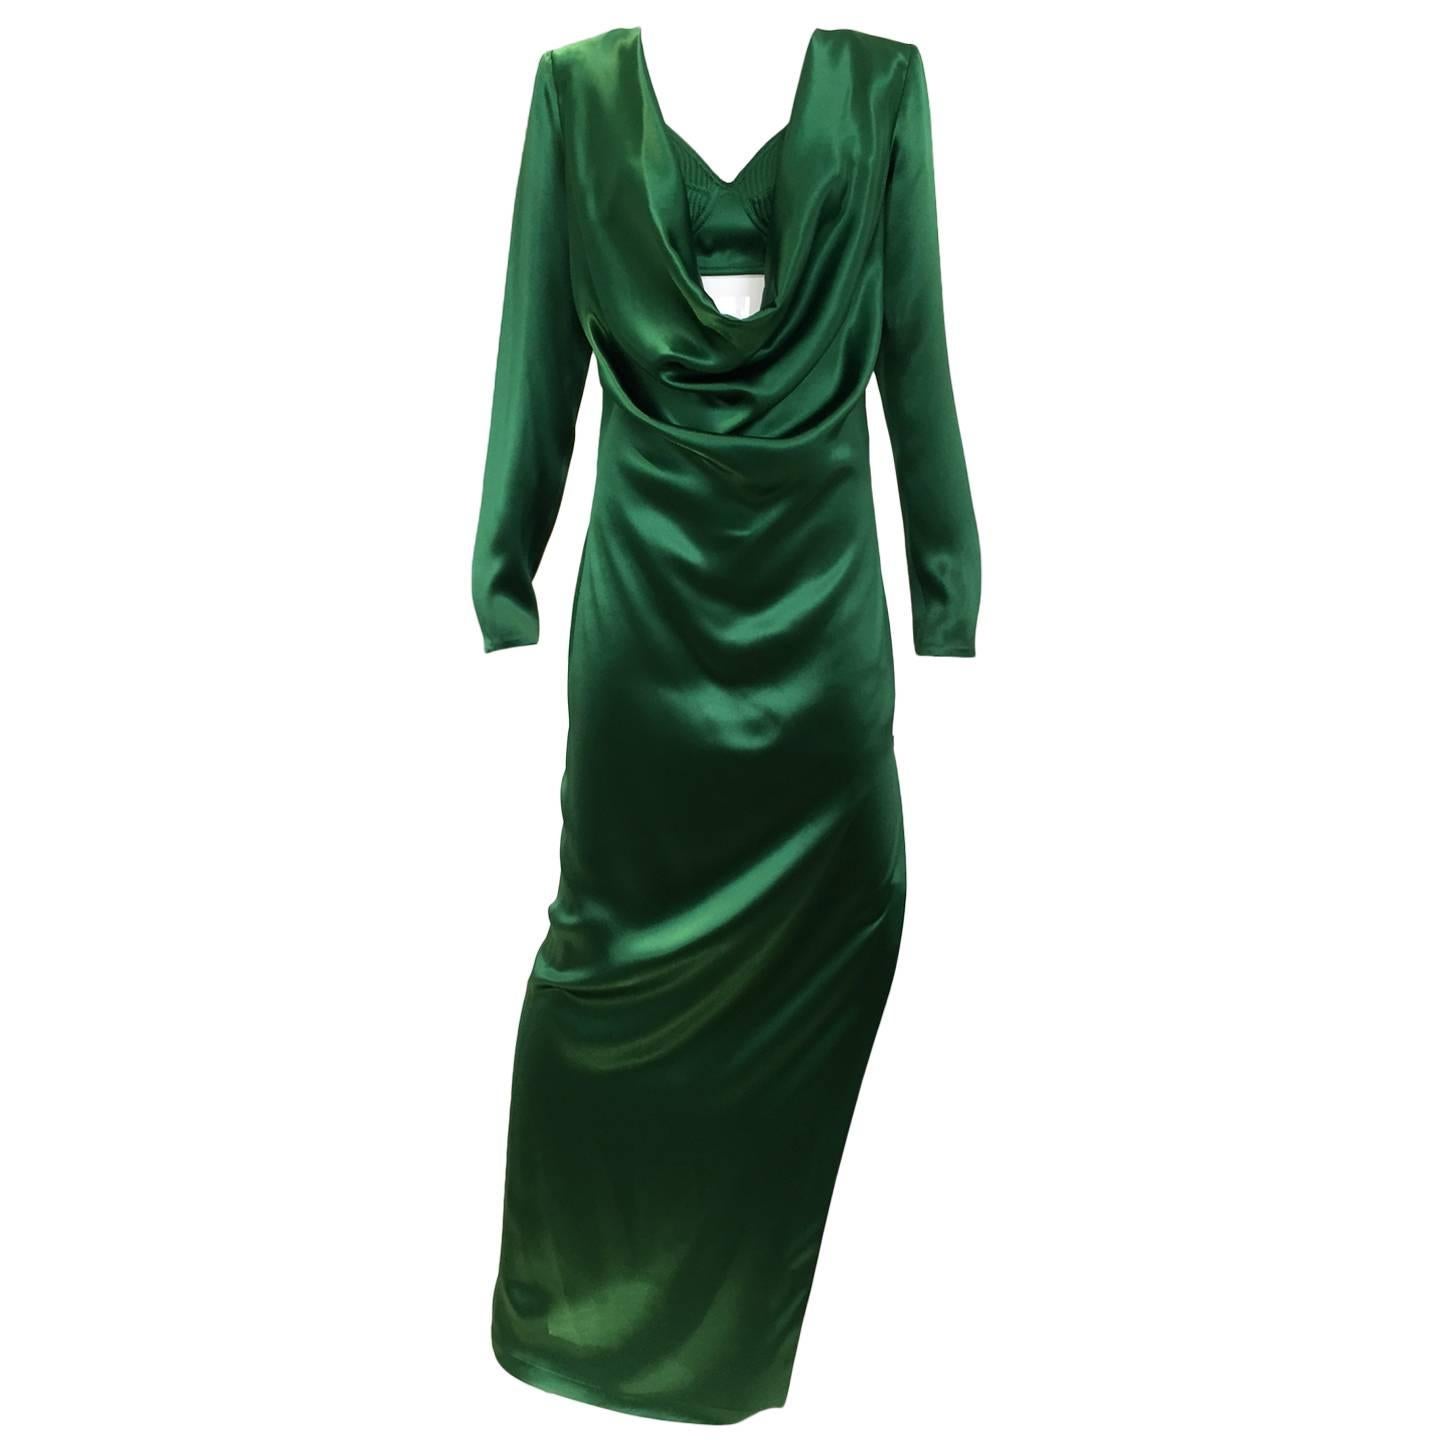 90s Iconic Jean Paul Gaultier emerald green silk charmeuse gown with bra